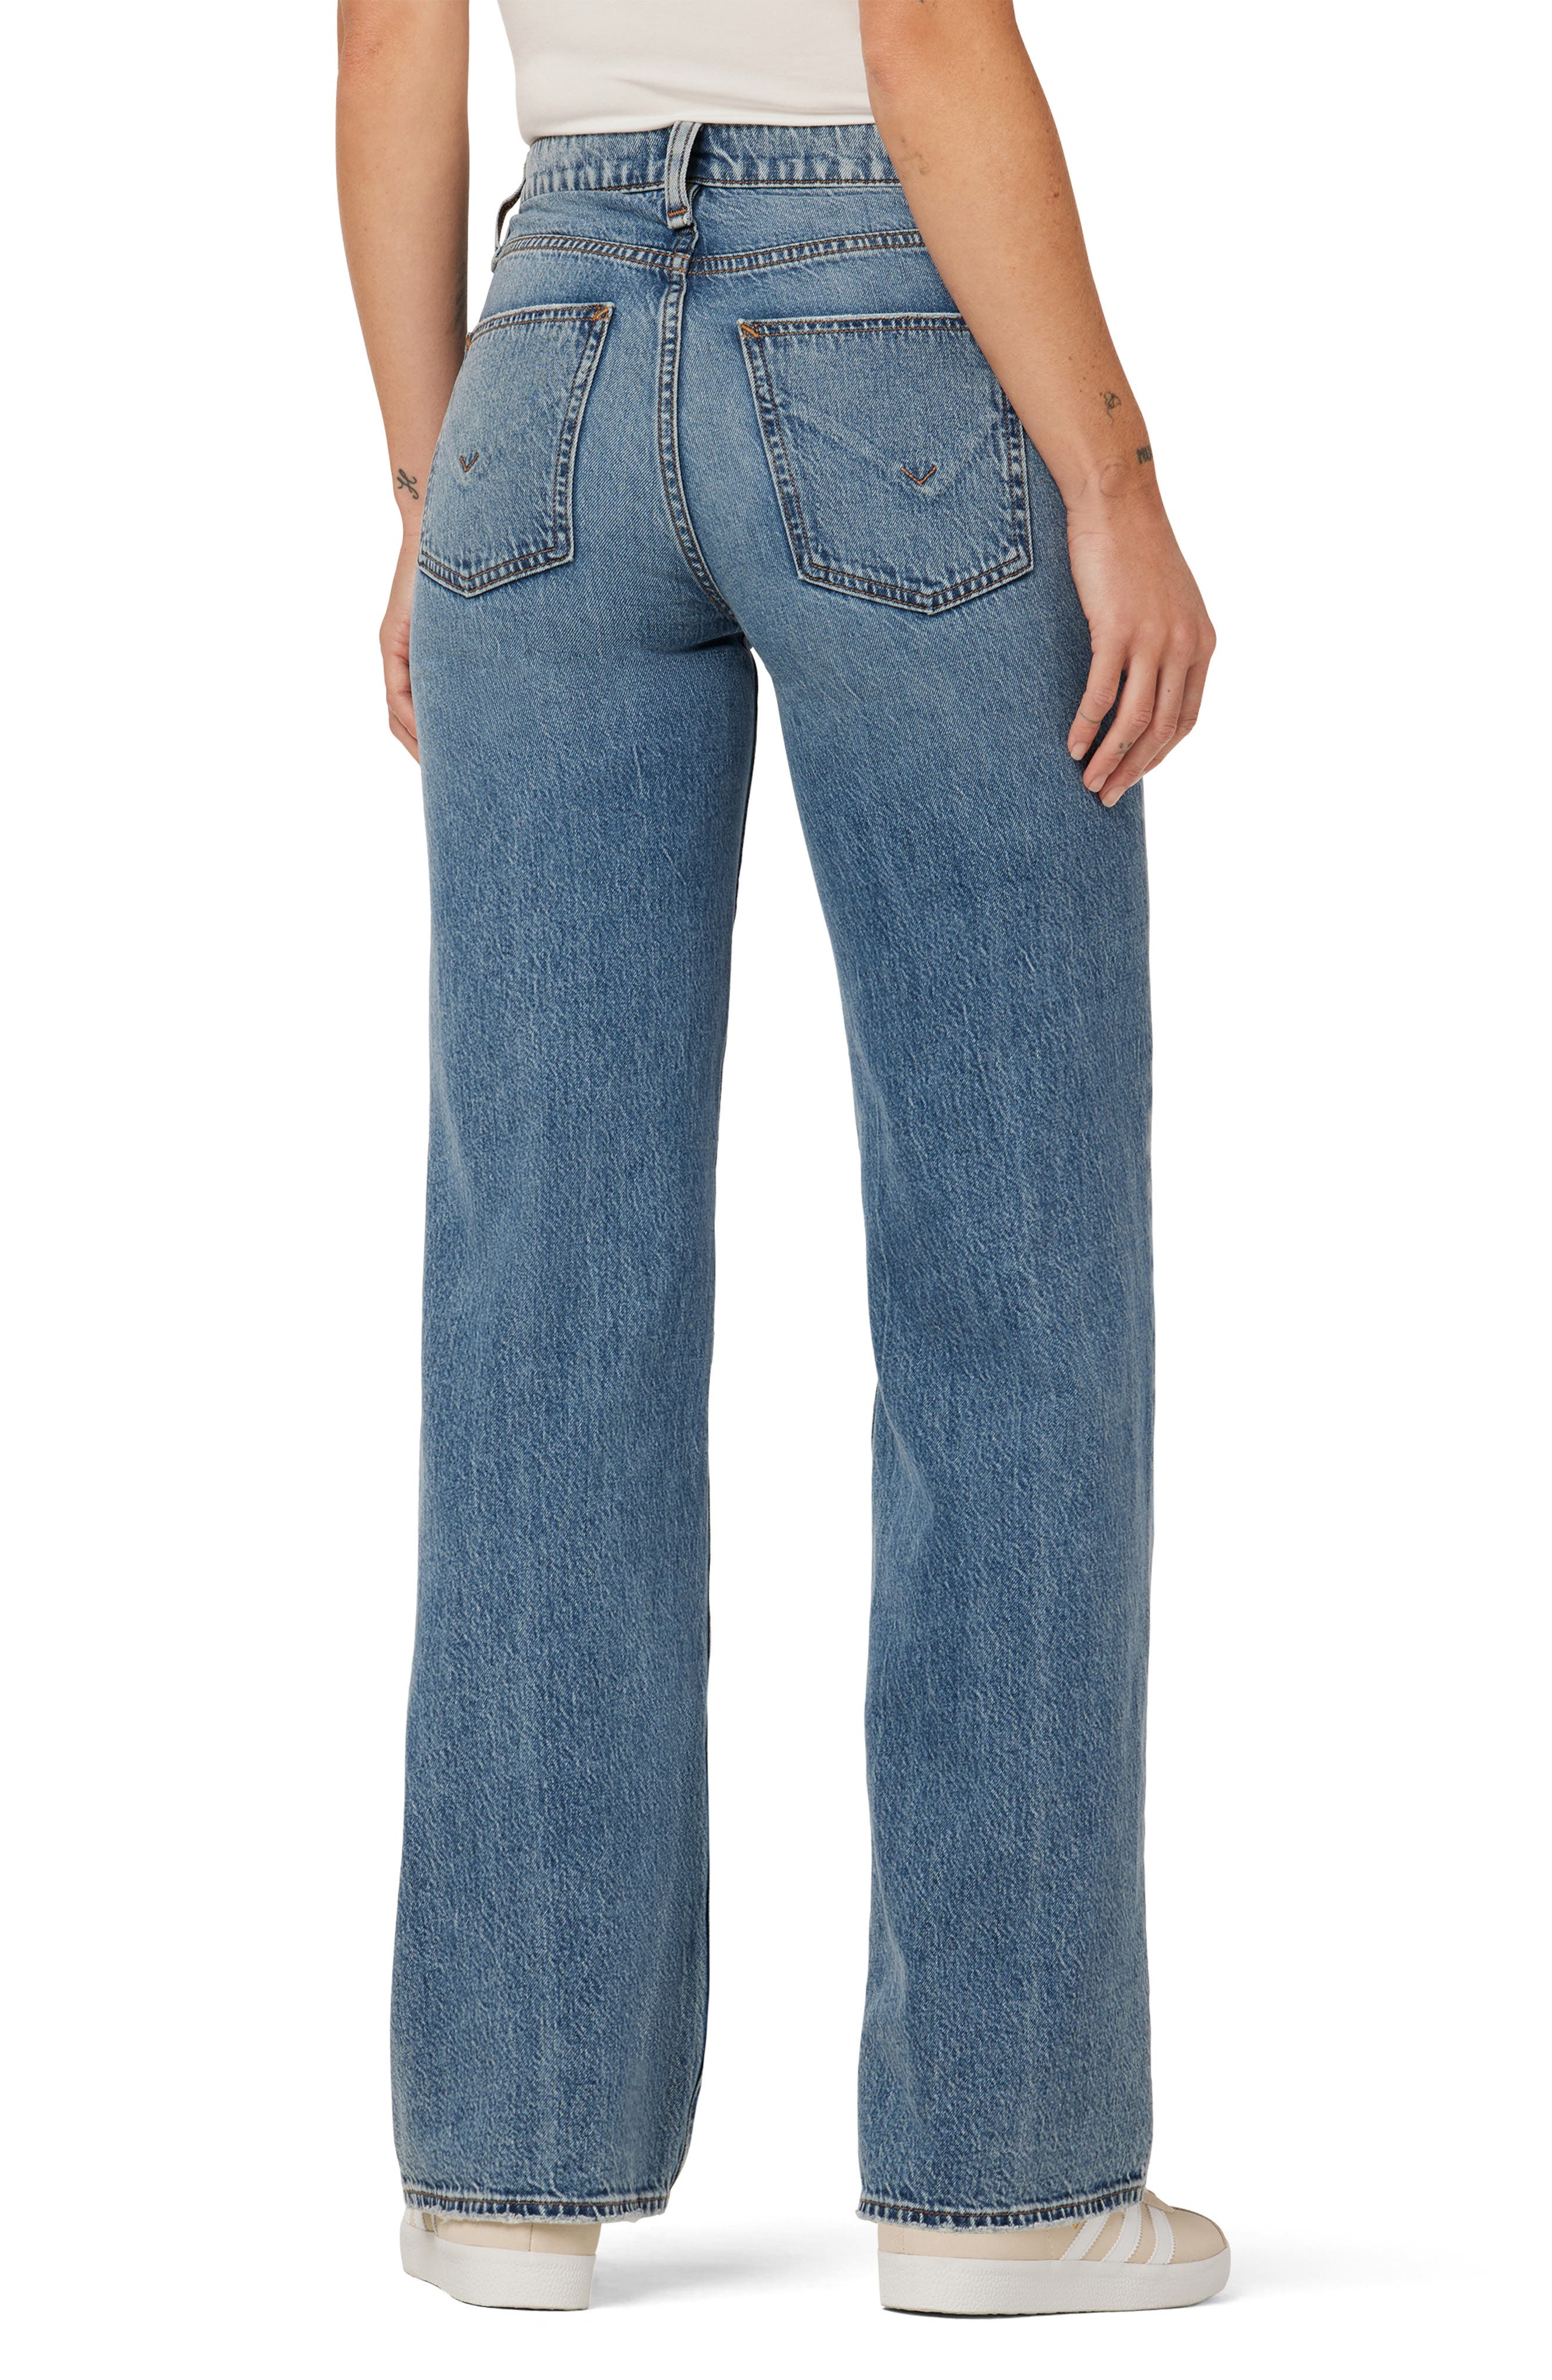 NEW Rosie High Rise Wide Leg Ankle Jean in Mogul Wash by Hudson